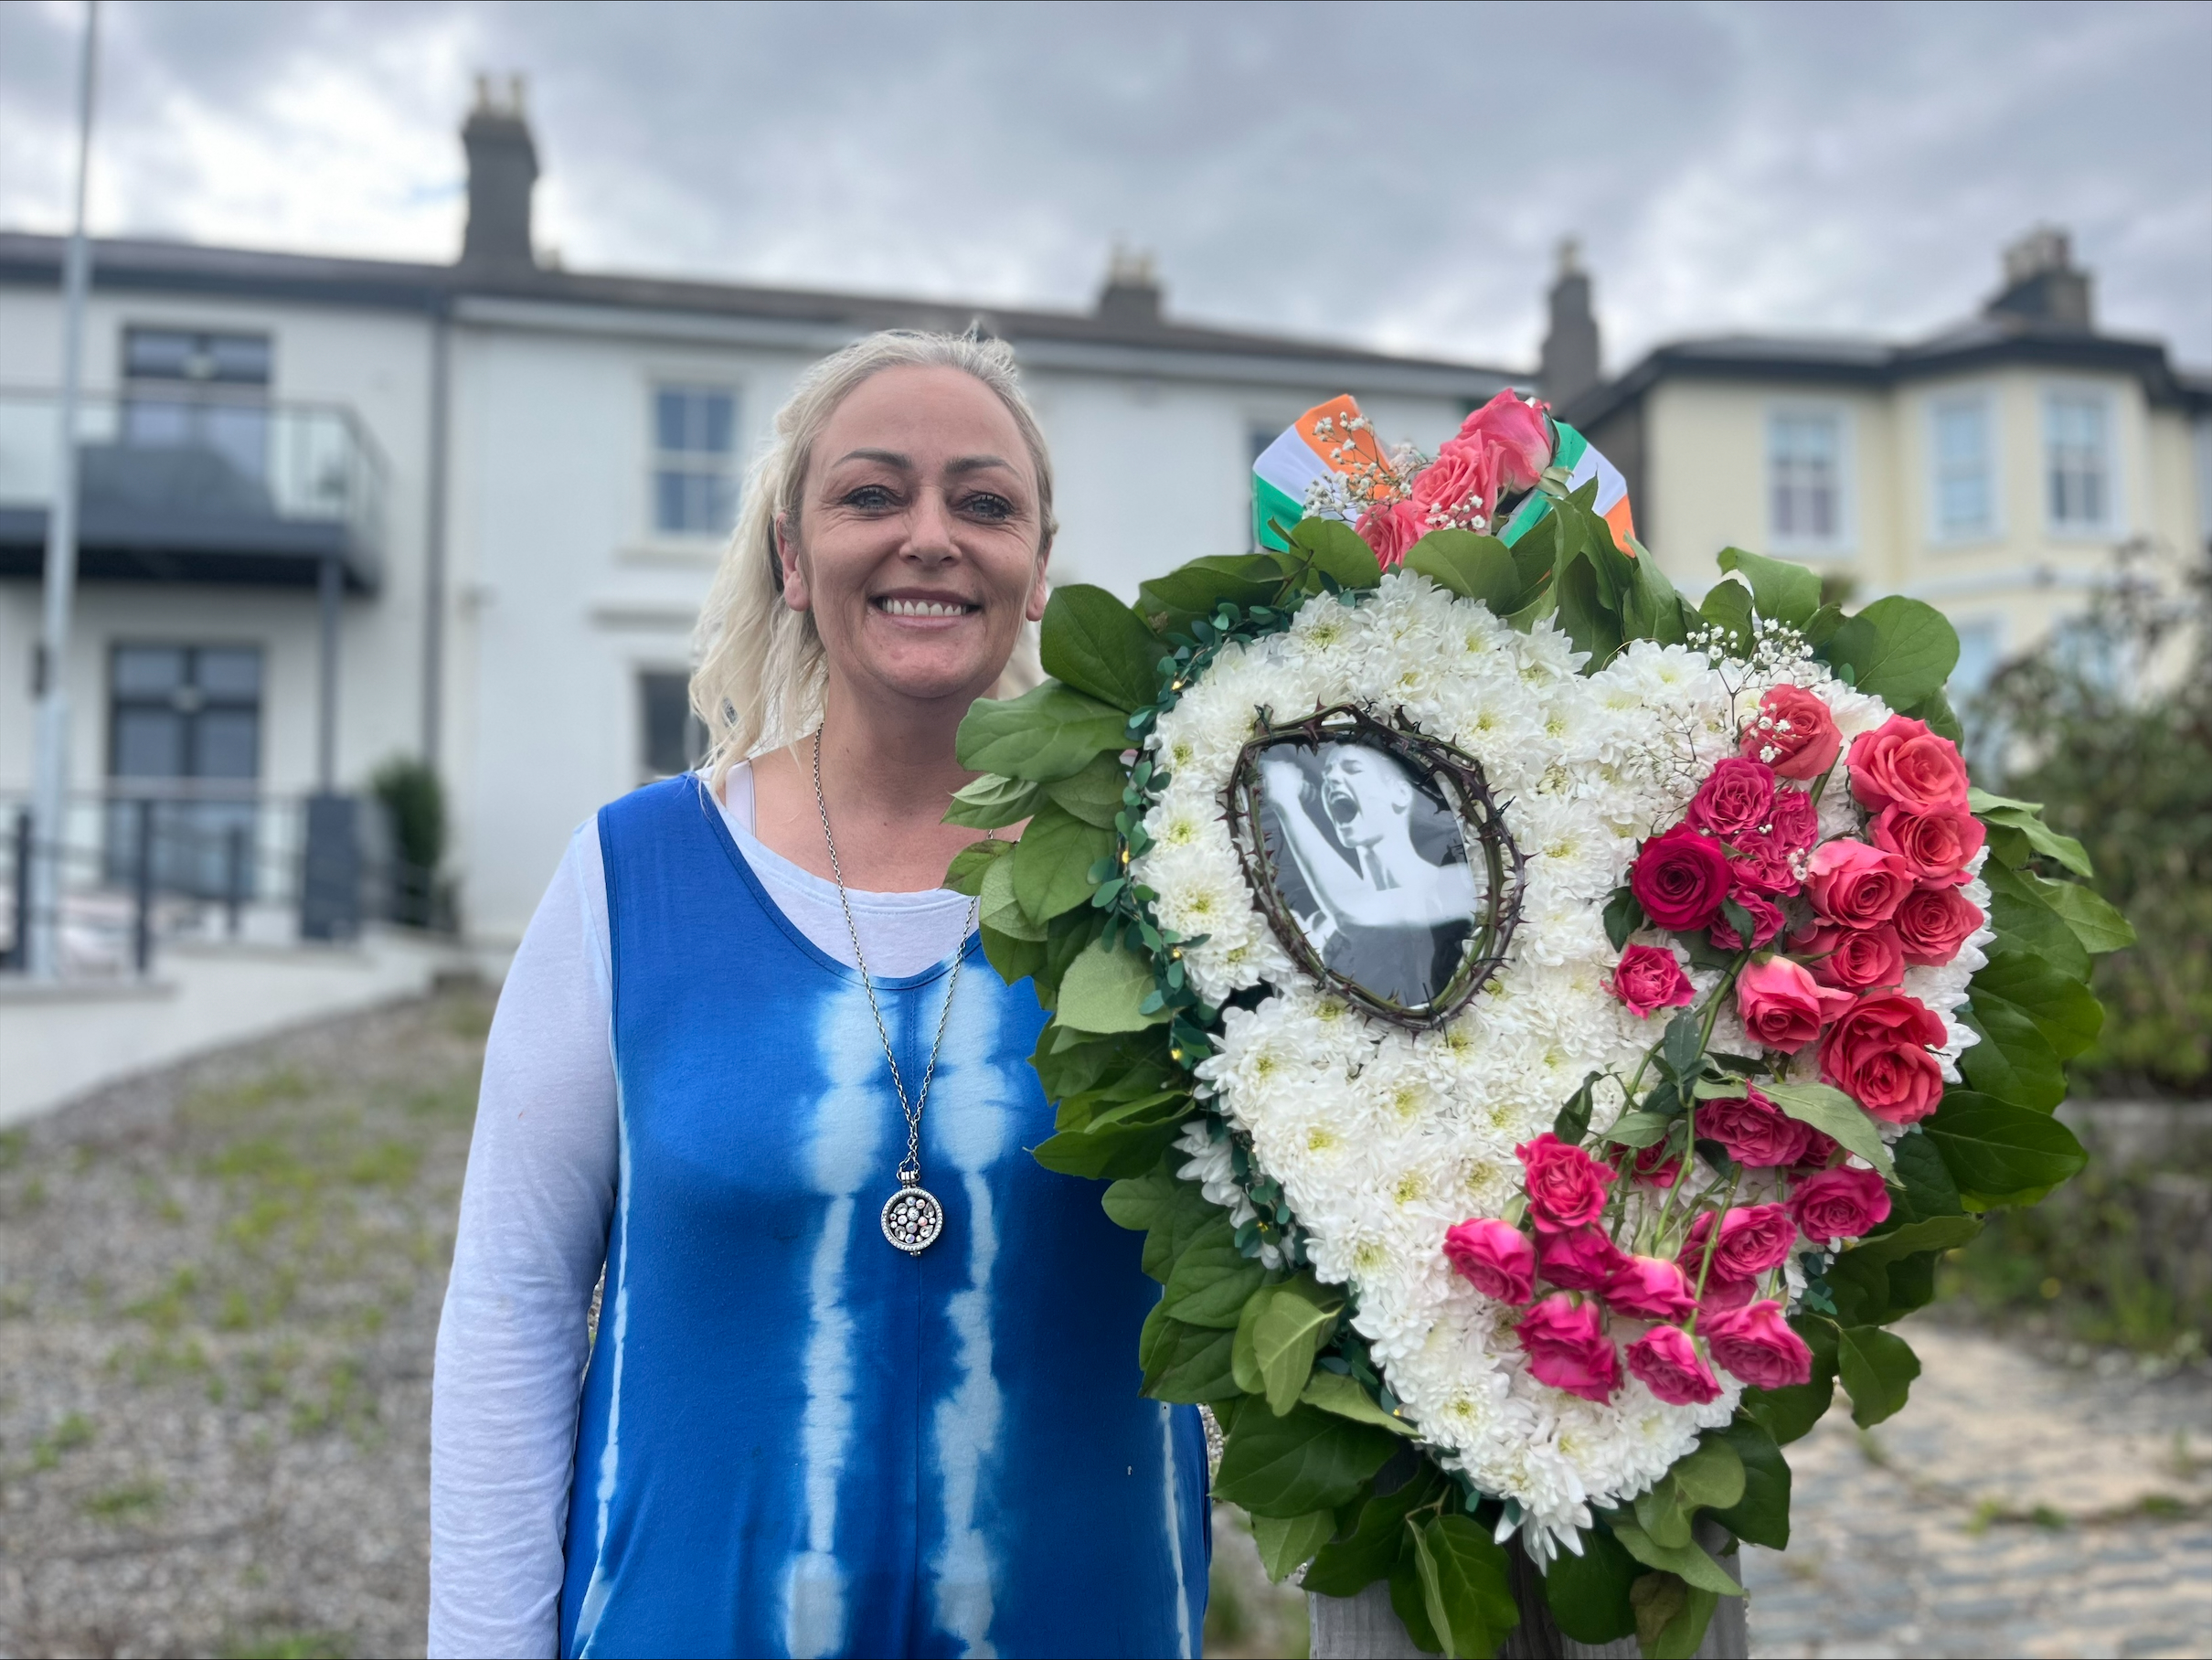 Karen Kehoe with a wreath she designed for Sinead O'Connor on behalf of victims of abuse in Ireland, laid outside the singer's former home in Bray Co. Wicklow. (Claudia Savage/PA).